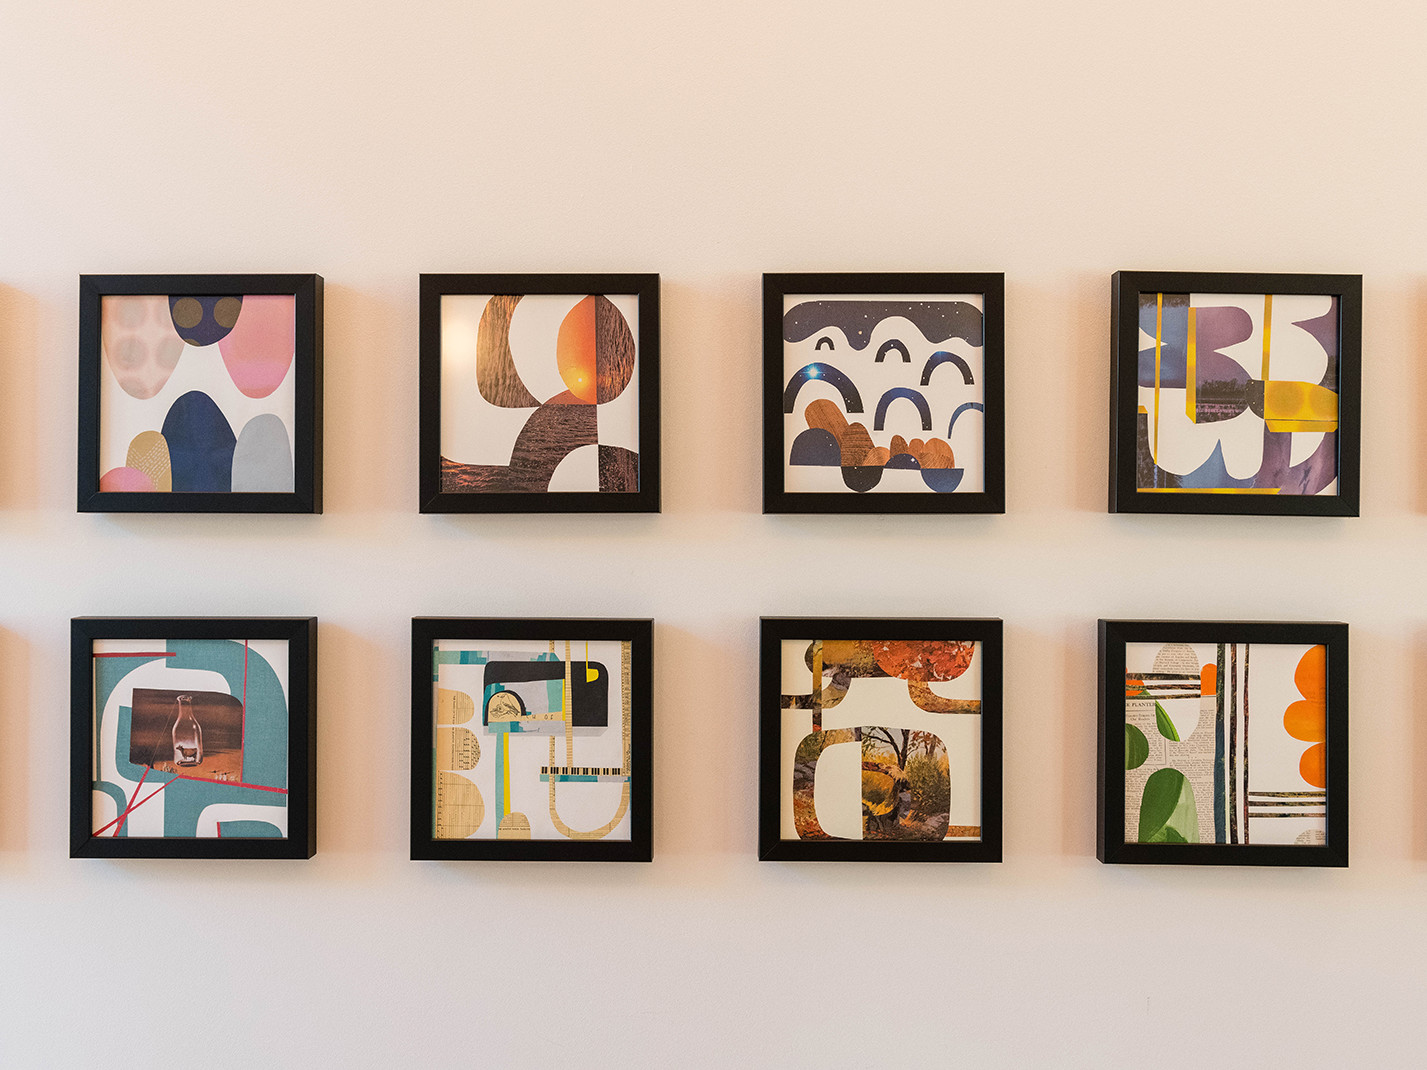 two stacked rows of repeating square black frames on a neutral color wall hold geometric and colorful art prints